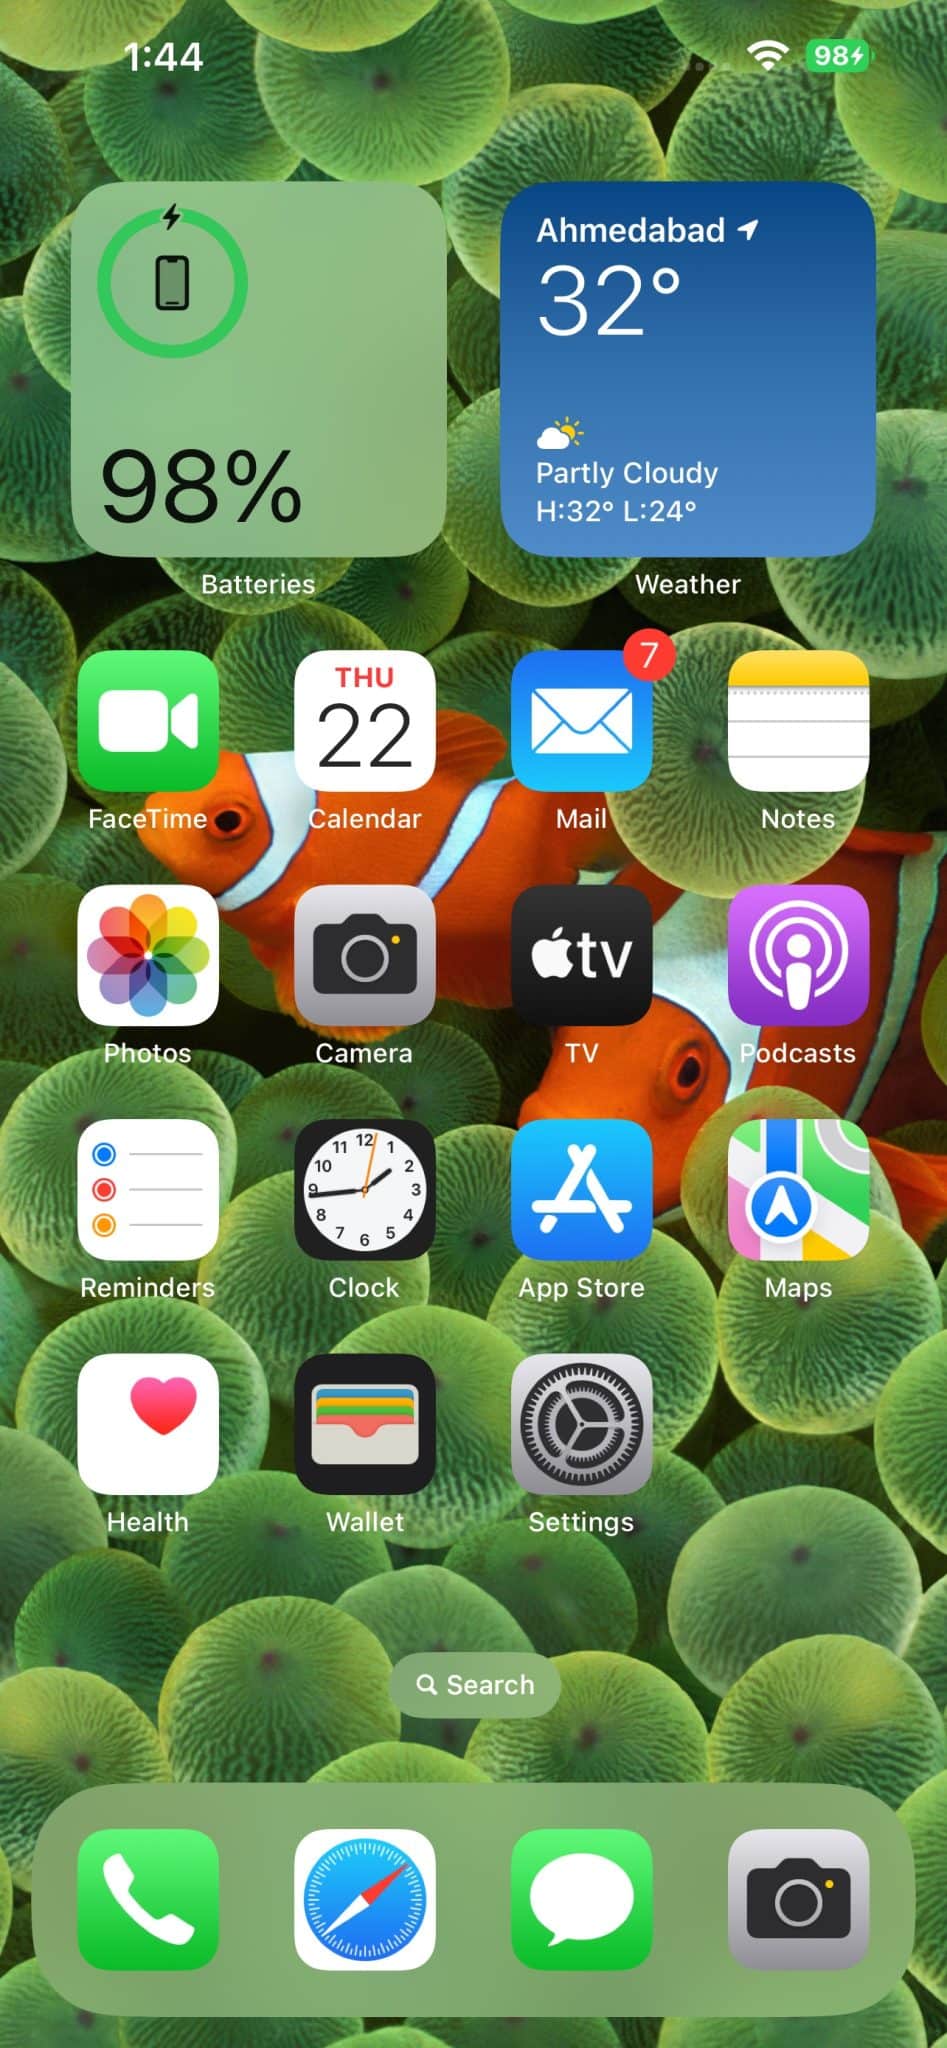 Using Spotlight Search on iPhone Homescreen